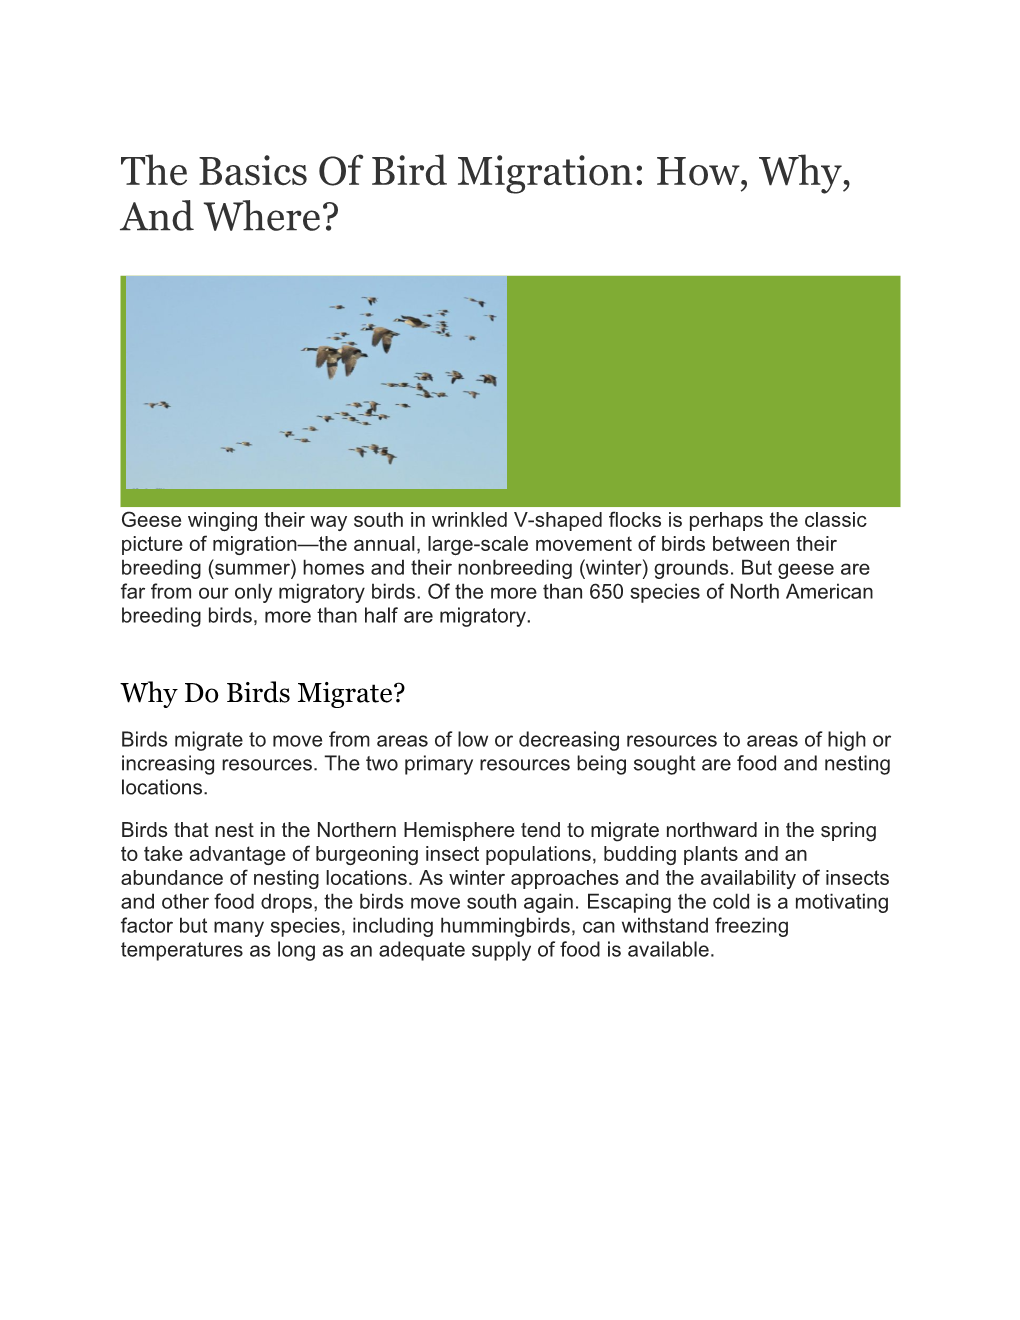 The Basics of Bird Migration: How, Why, and Where?